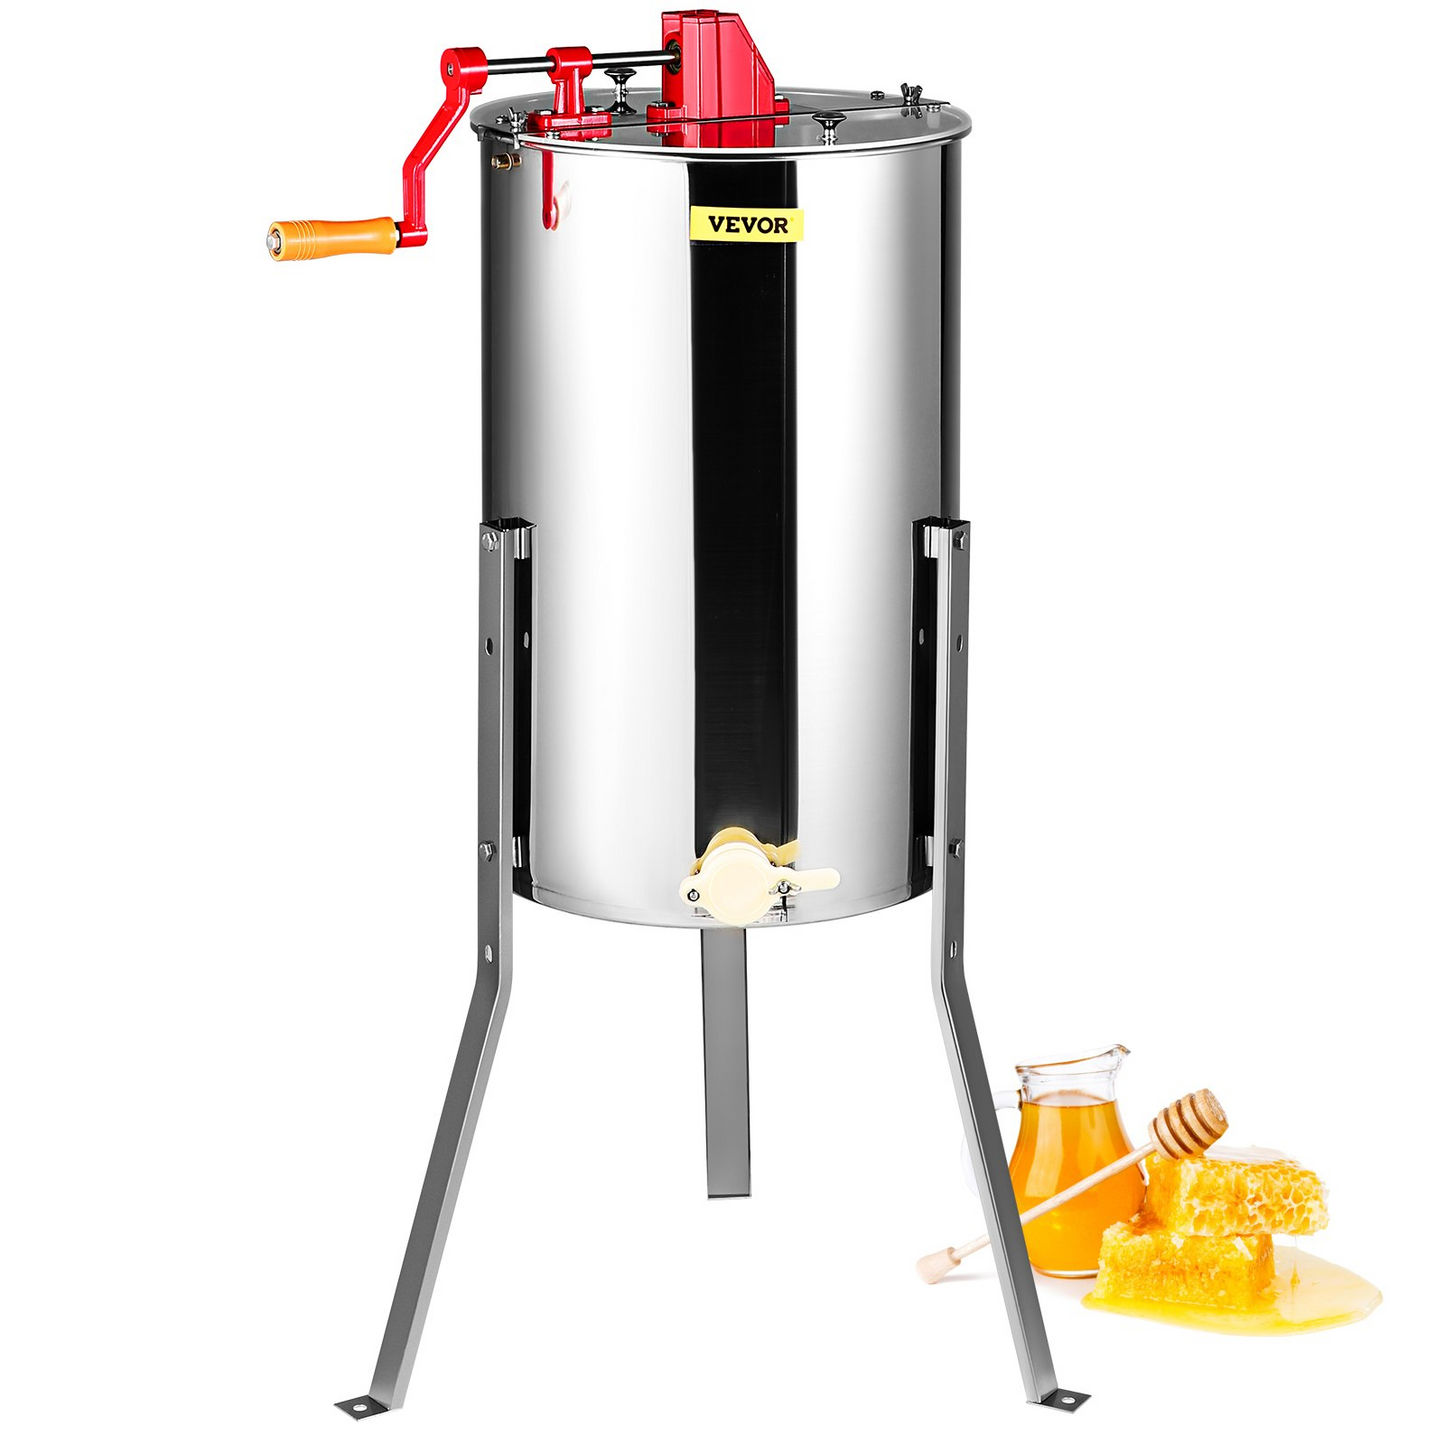 VEVOR Manual Honey Extractor, 2/4 Frames Honey Spinner Extractor, Stainless Steel Beekeeping Extraction, Honeycomb Drum Spinner with Lid, Apiary Centrifuge Equipment with Height Adjustable Stand, Goodies N Stuff